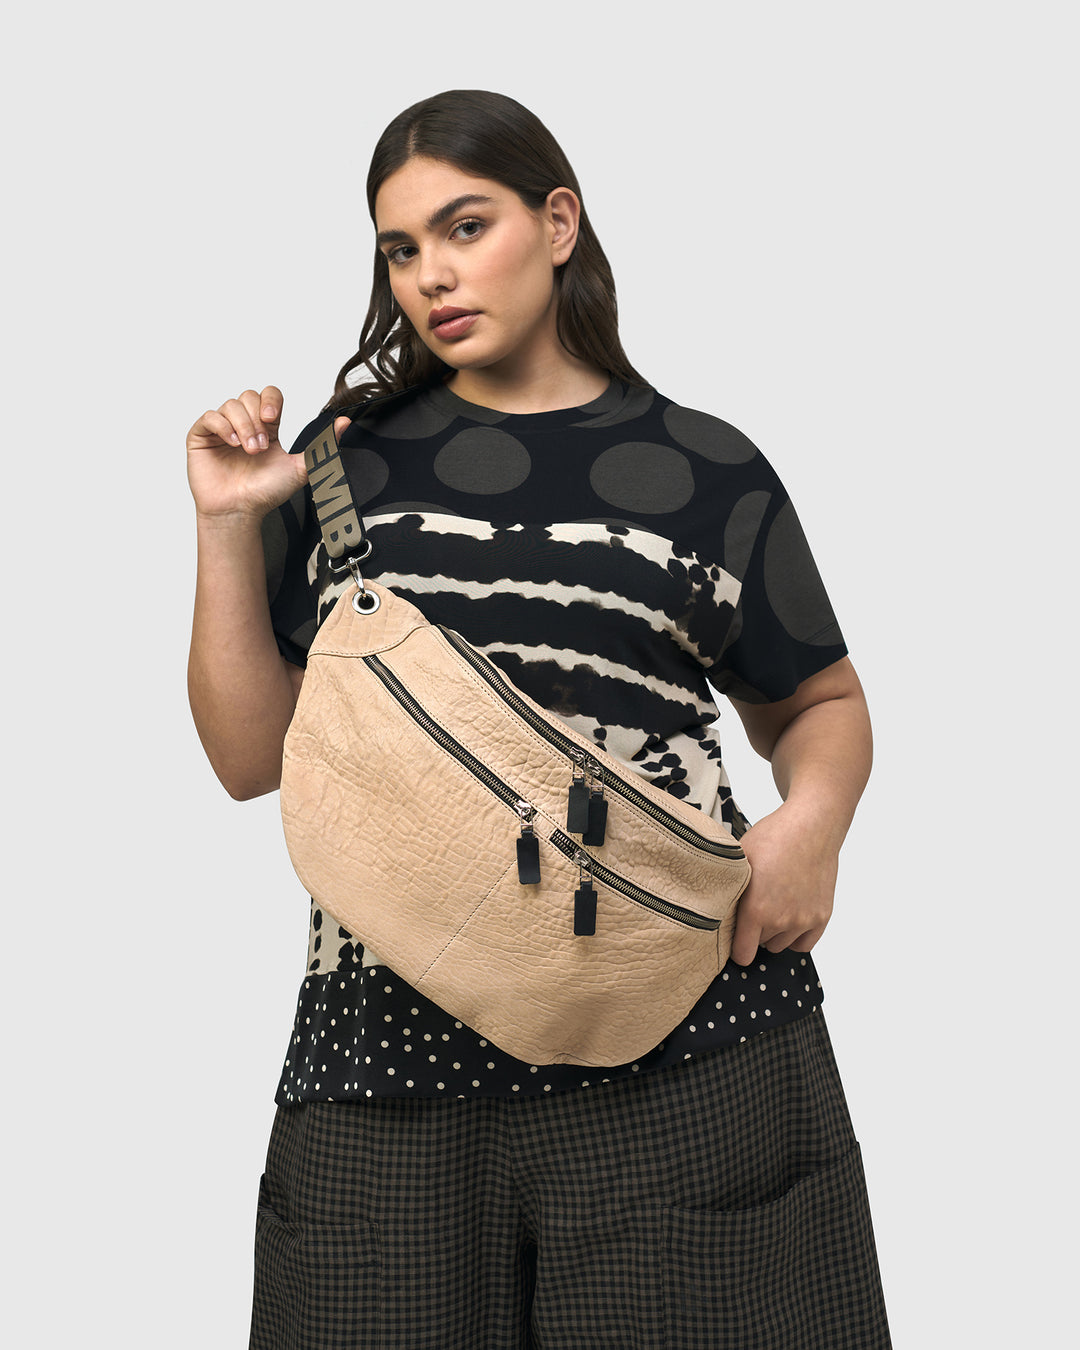 On-the-Go Large Sling Bag, Nude